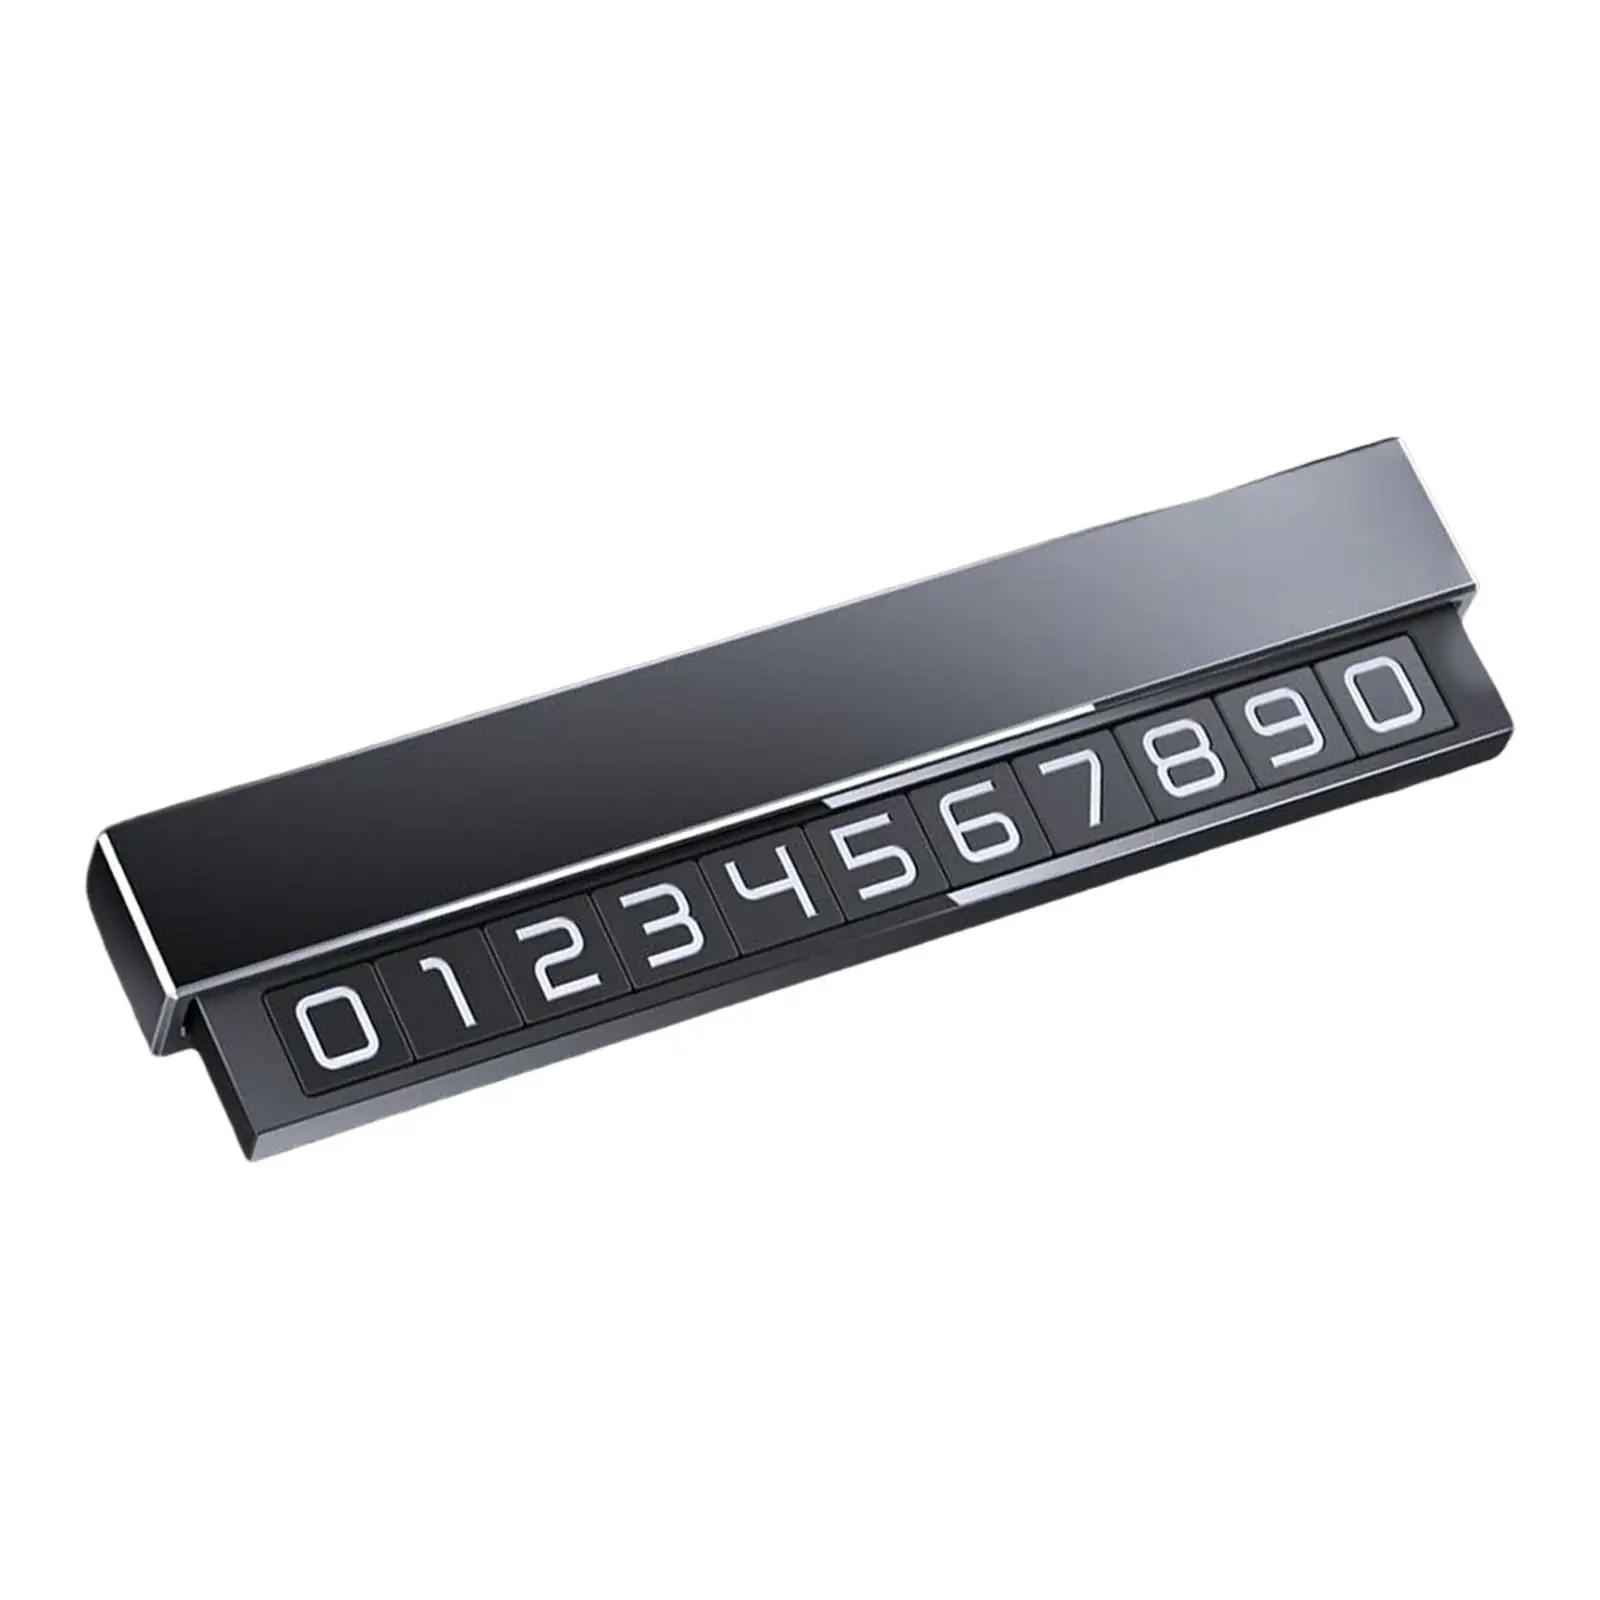 Automobile Parking Number Sign Car Styling Parts for Cars Dashboard